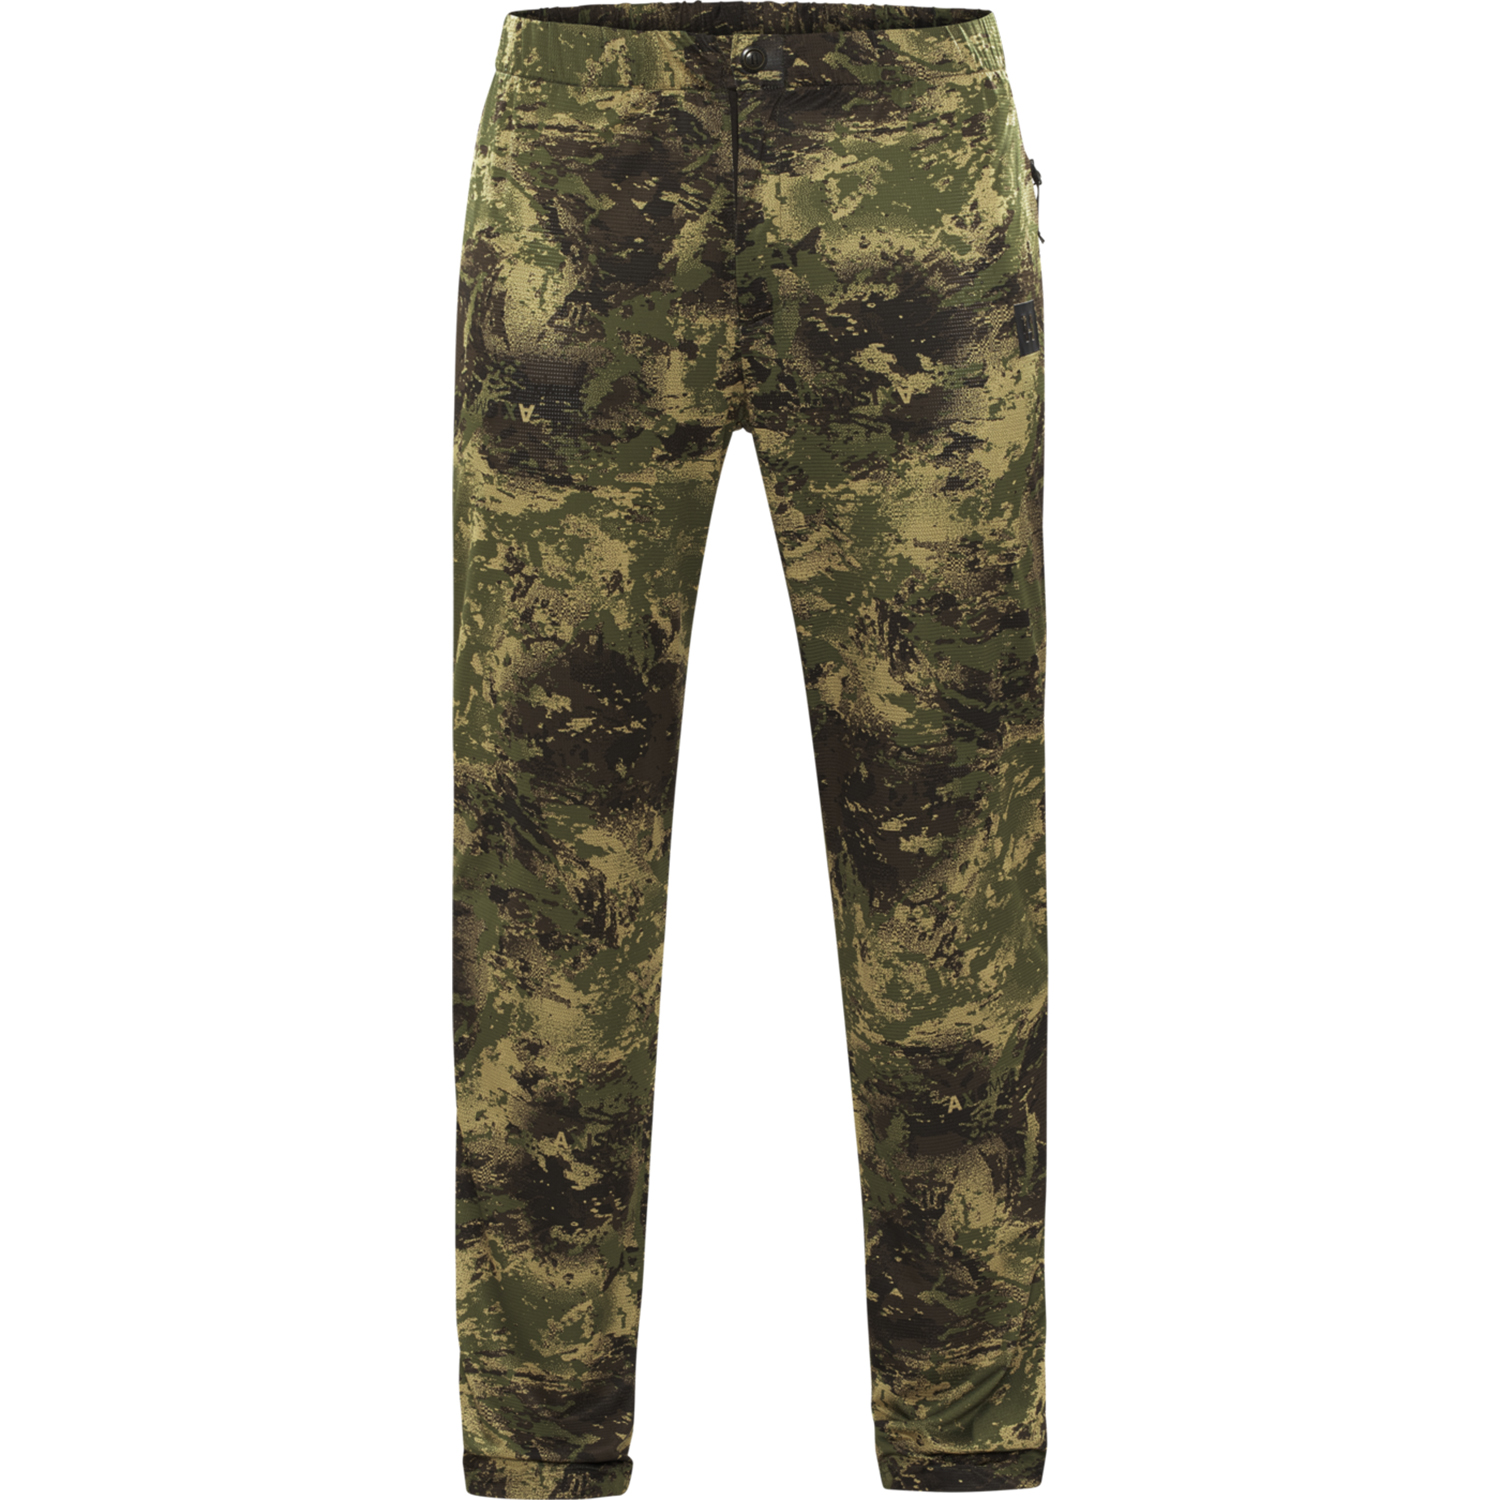 Härkila cover trousers deer stalker (AXIS MSP) - Camouflage Clothing